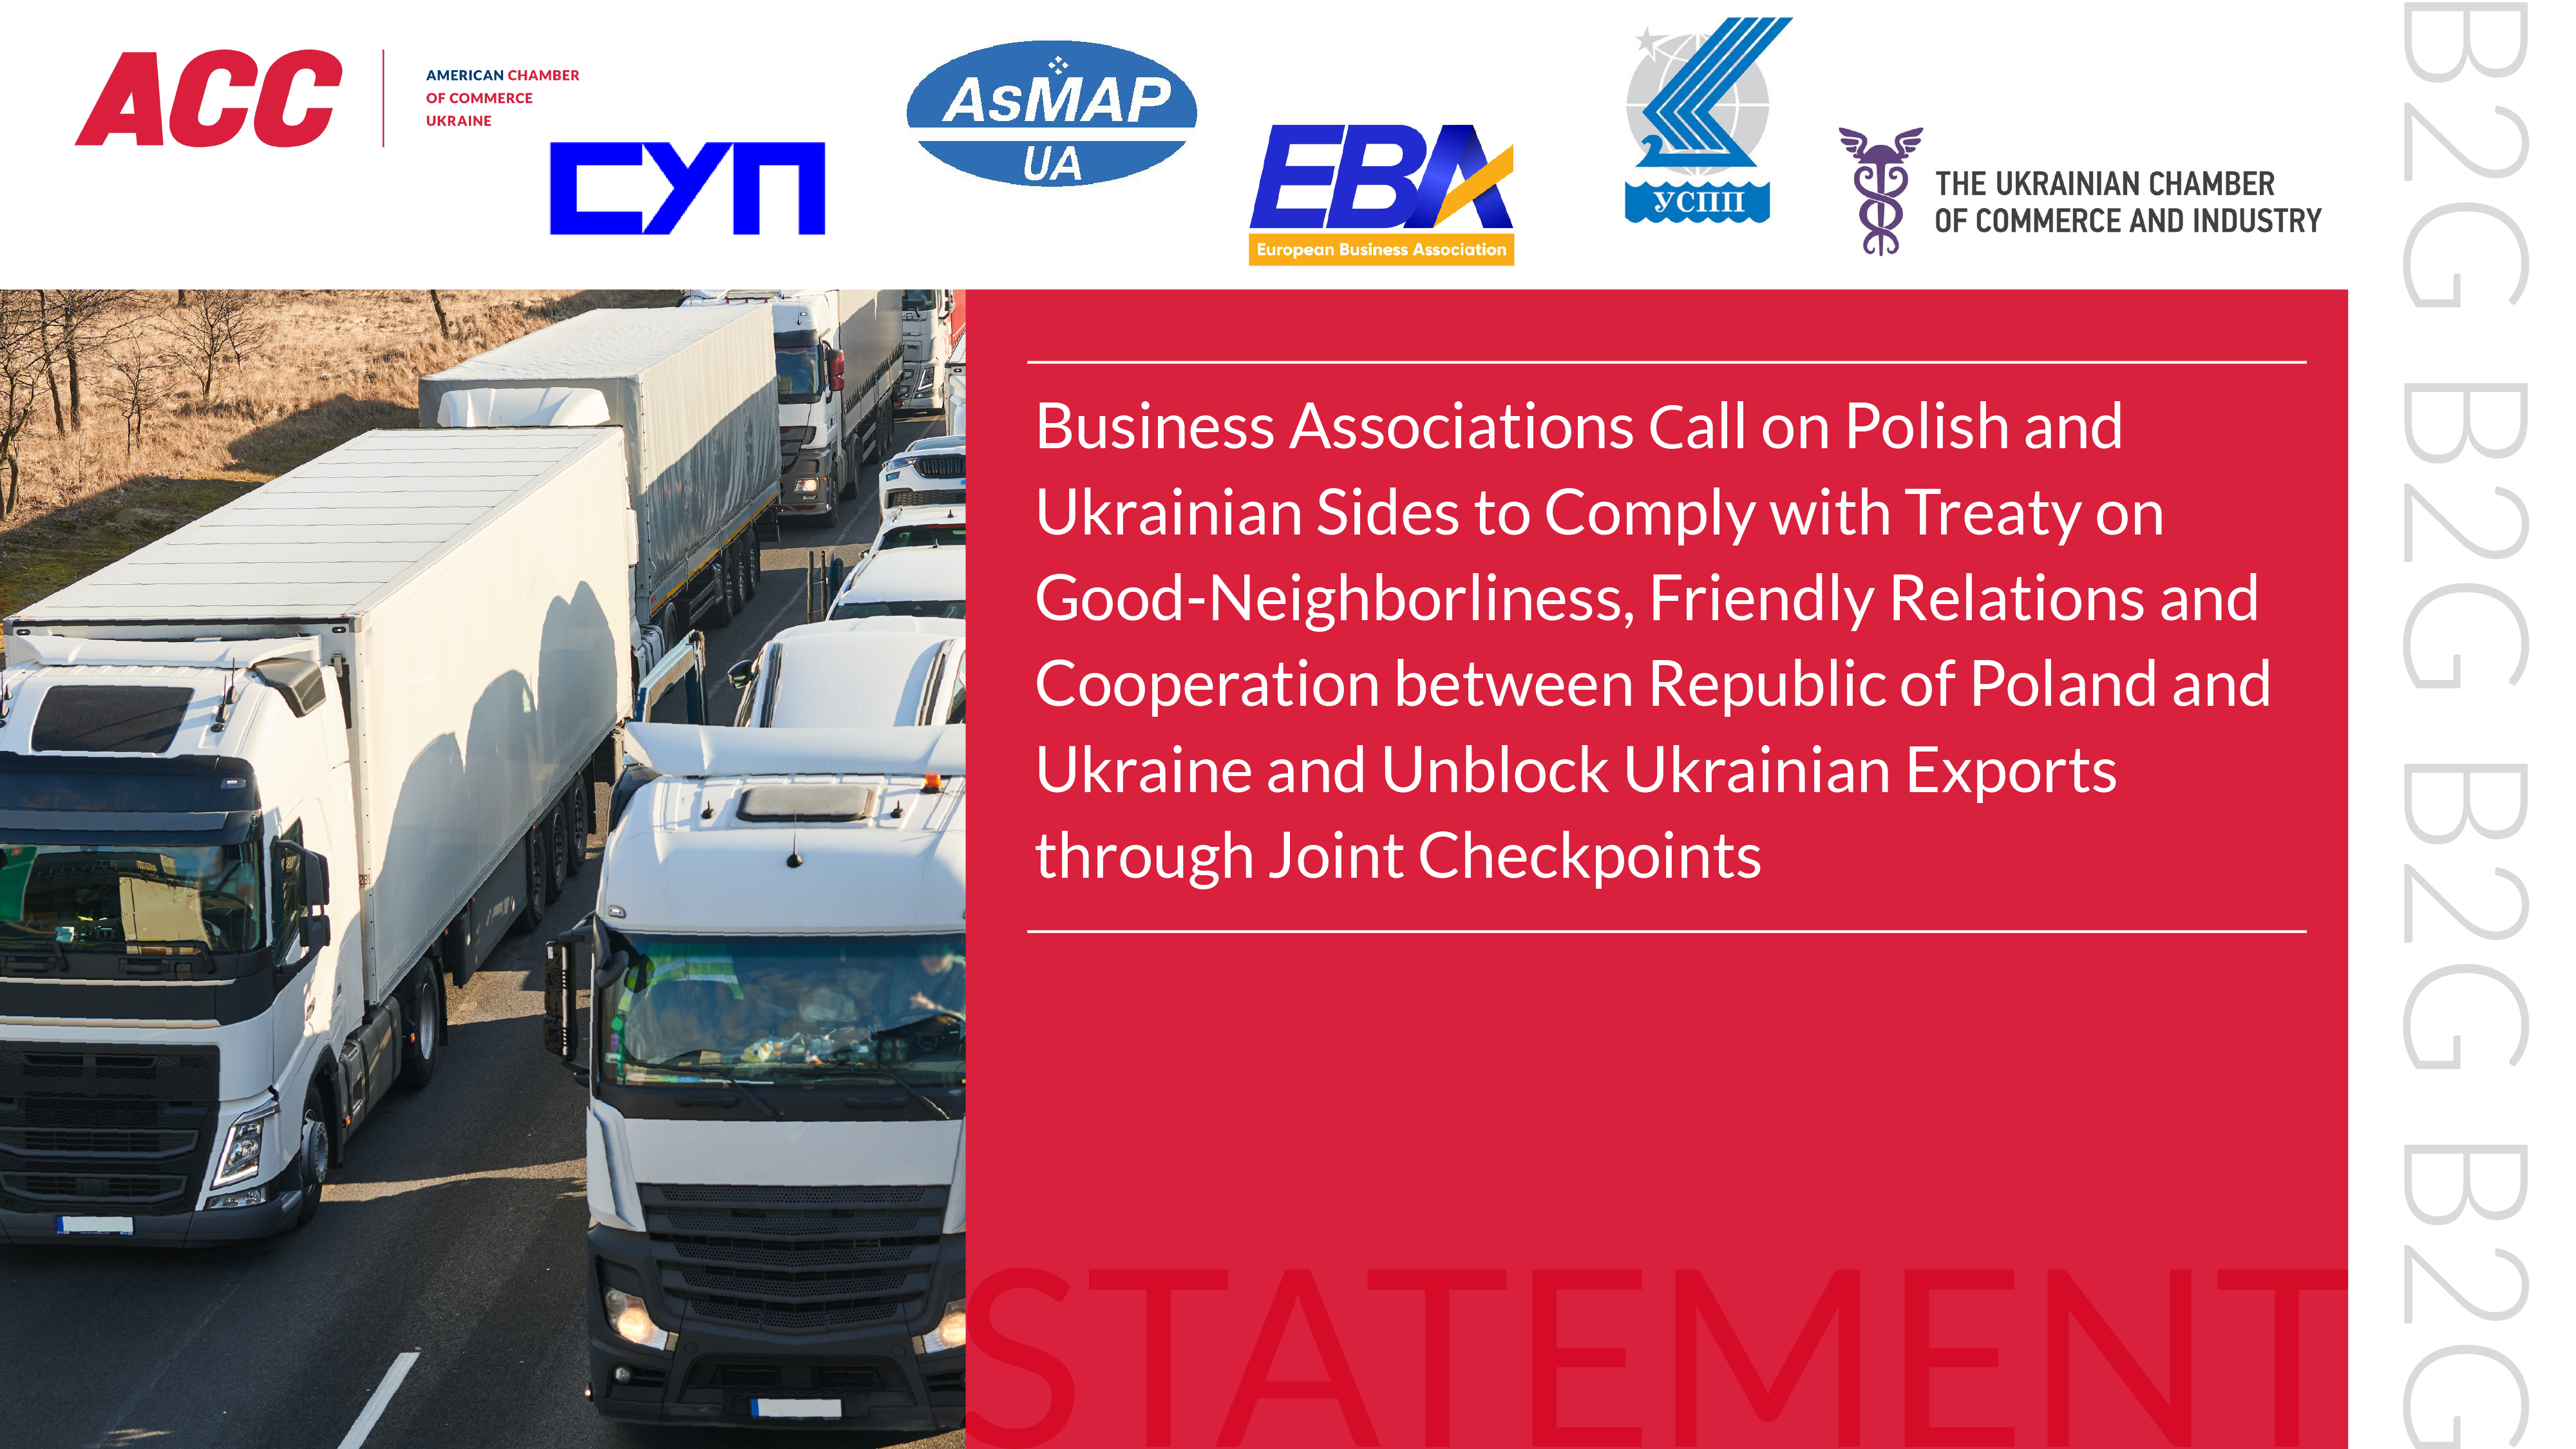 Business Associations Сall on Polish and Ukrainian Sides to Comply with Treaty on Good-Neighborliness, Friendly Relations and Cooperation between Republic of Poland and Ukraine and Unblock Ukrainian Exports through Joint Checkpoints